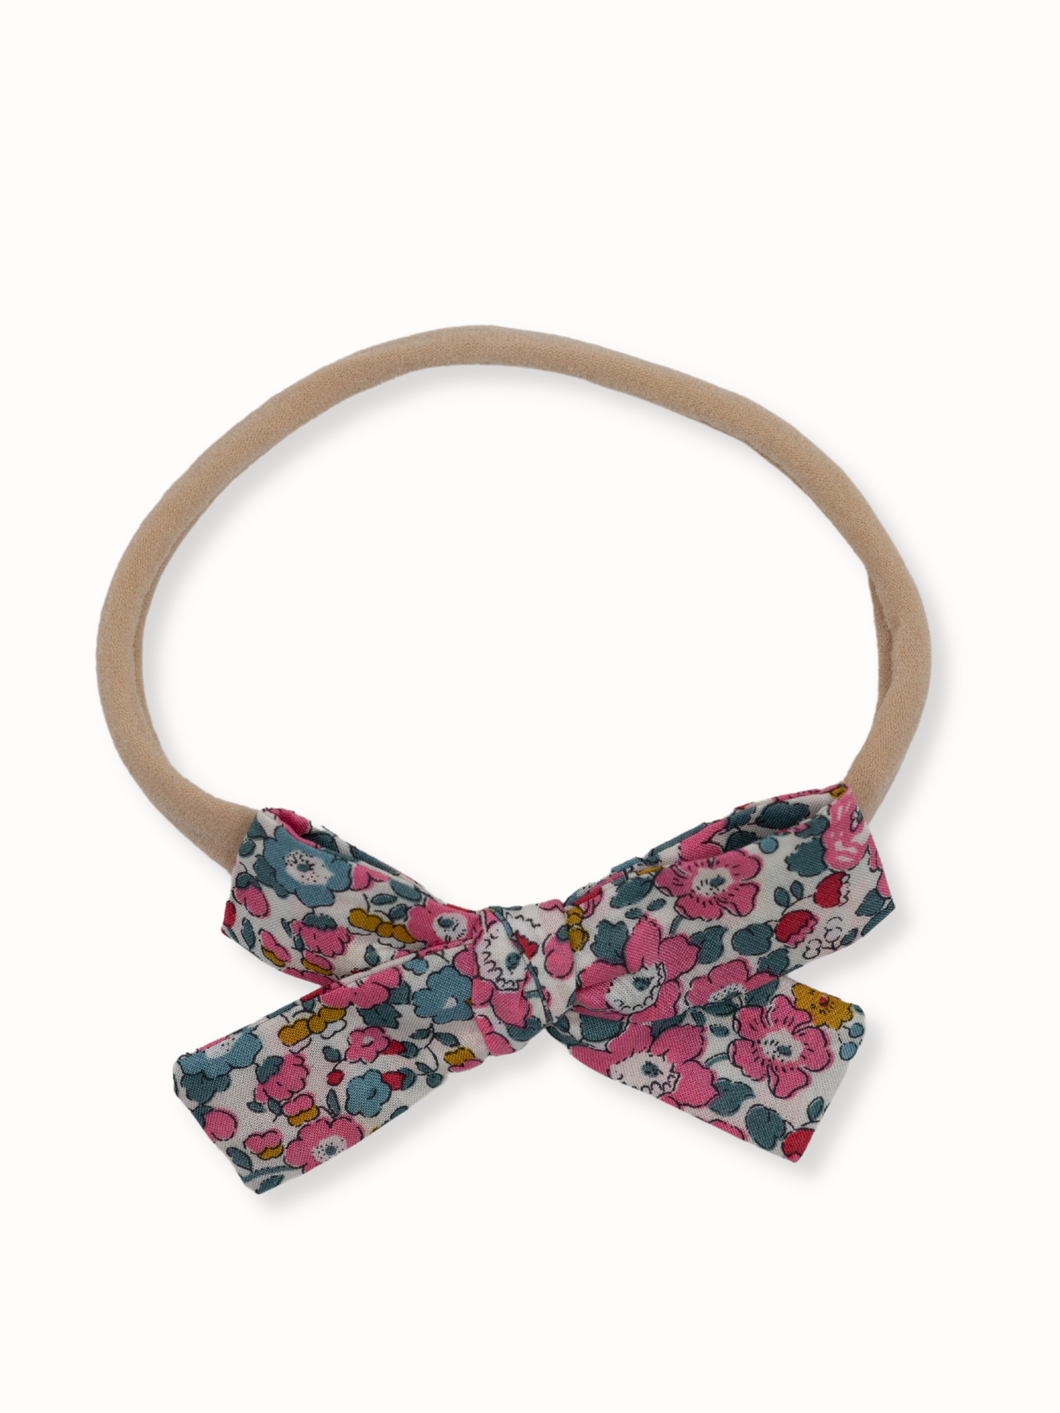 Betsy Anne Pink Liberty Baby Bow Headband